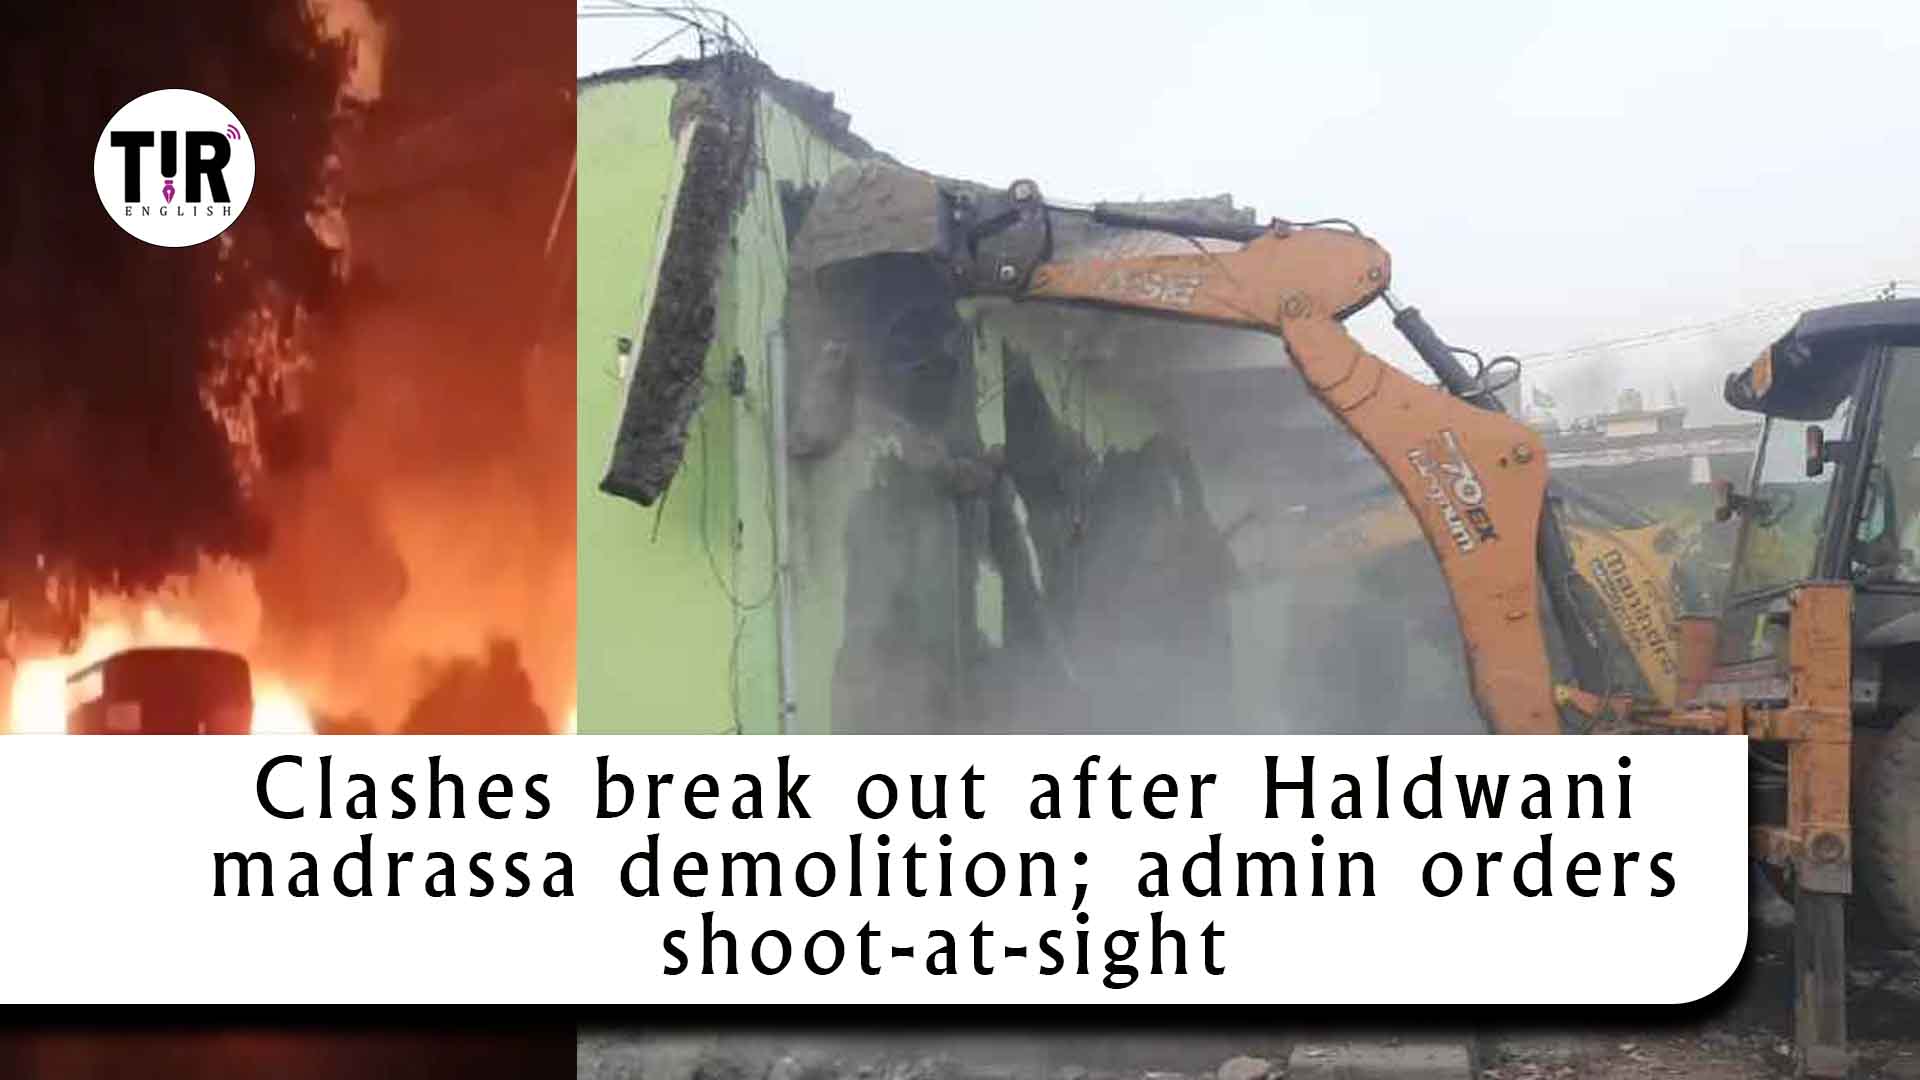 Clashes break out after Haldwani madrassa demolition; admin orders shoot-at-sight